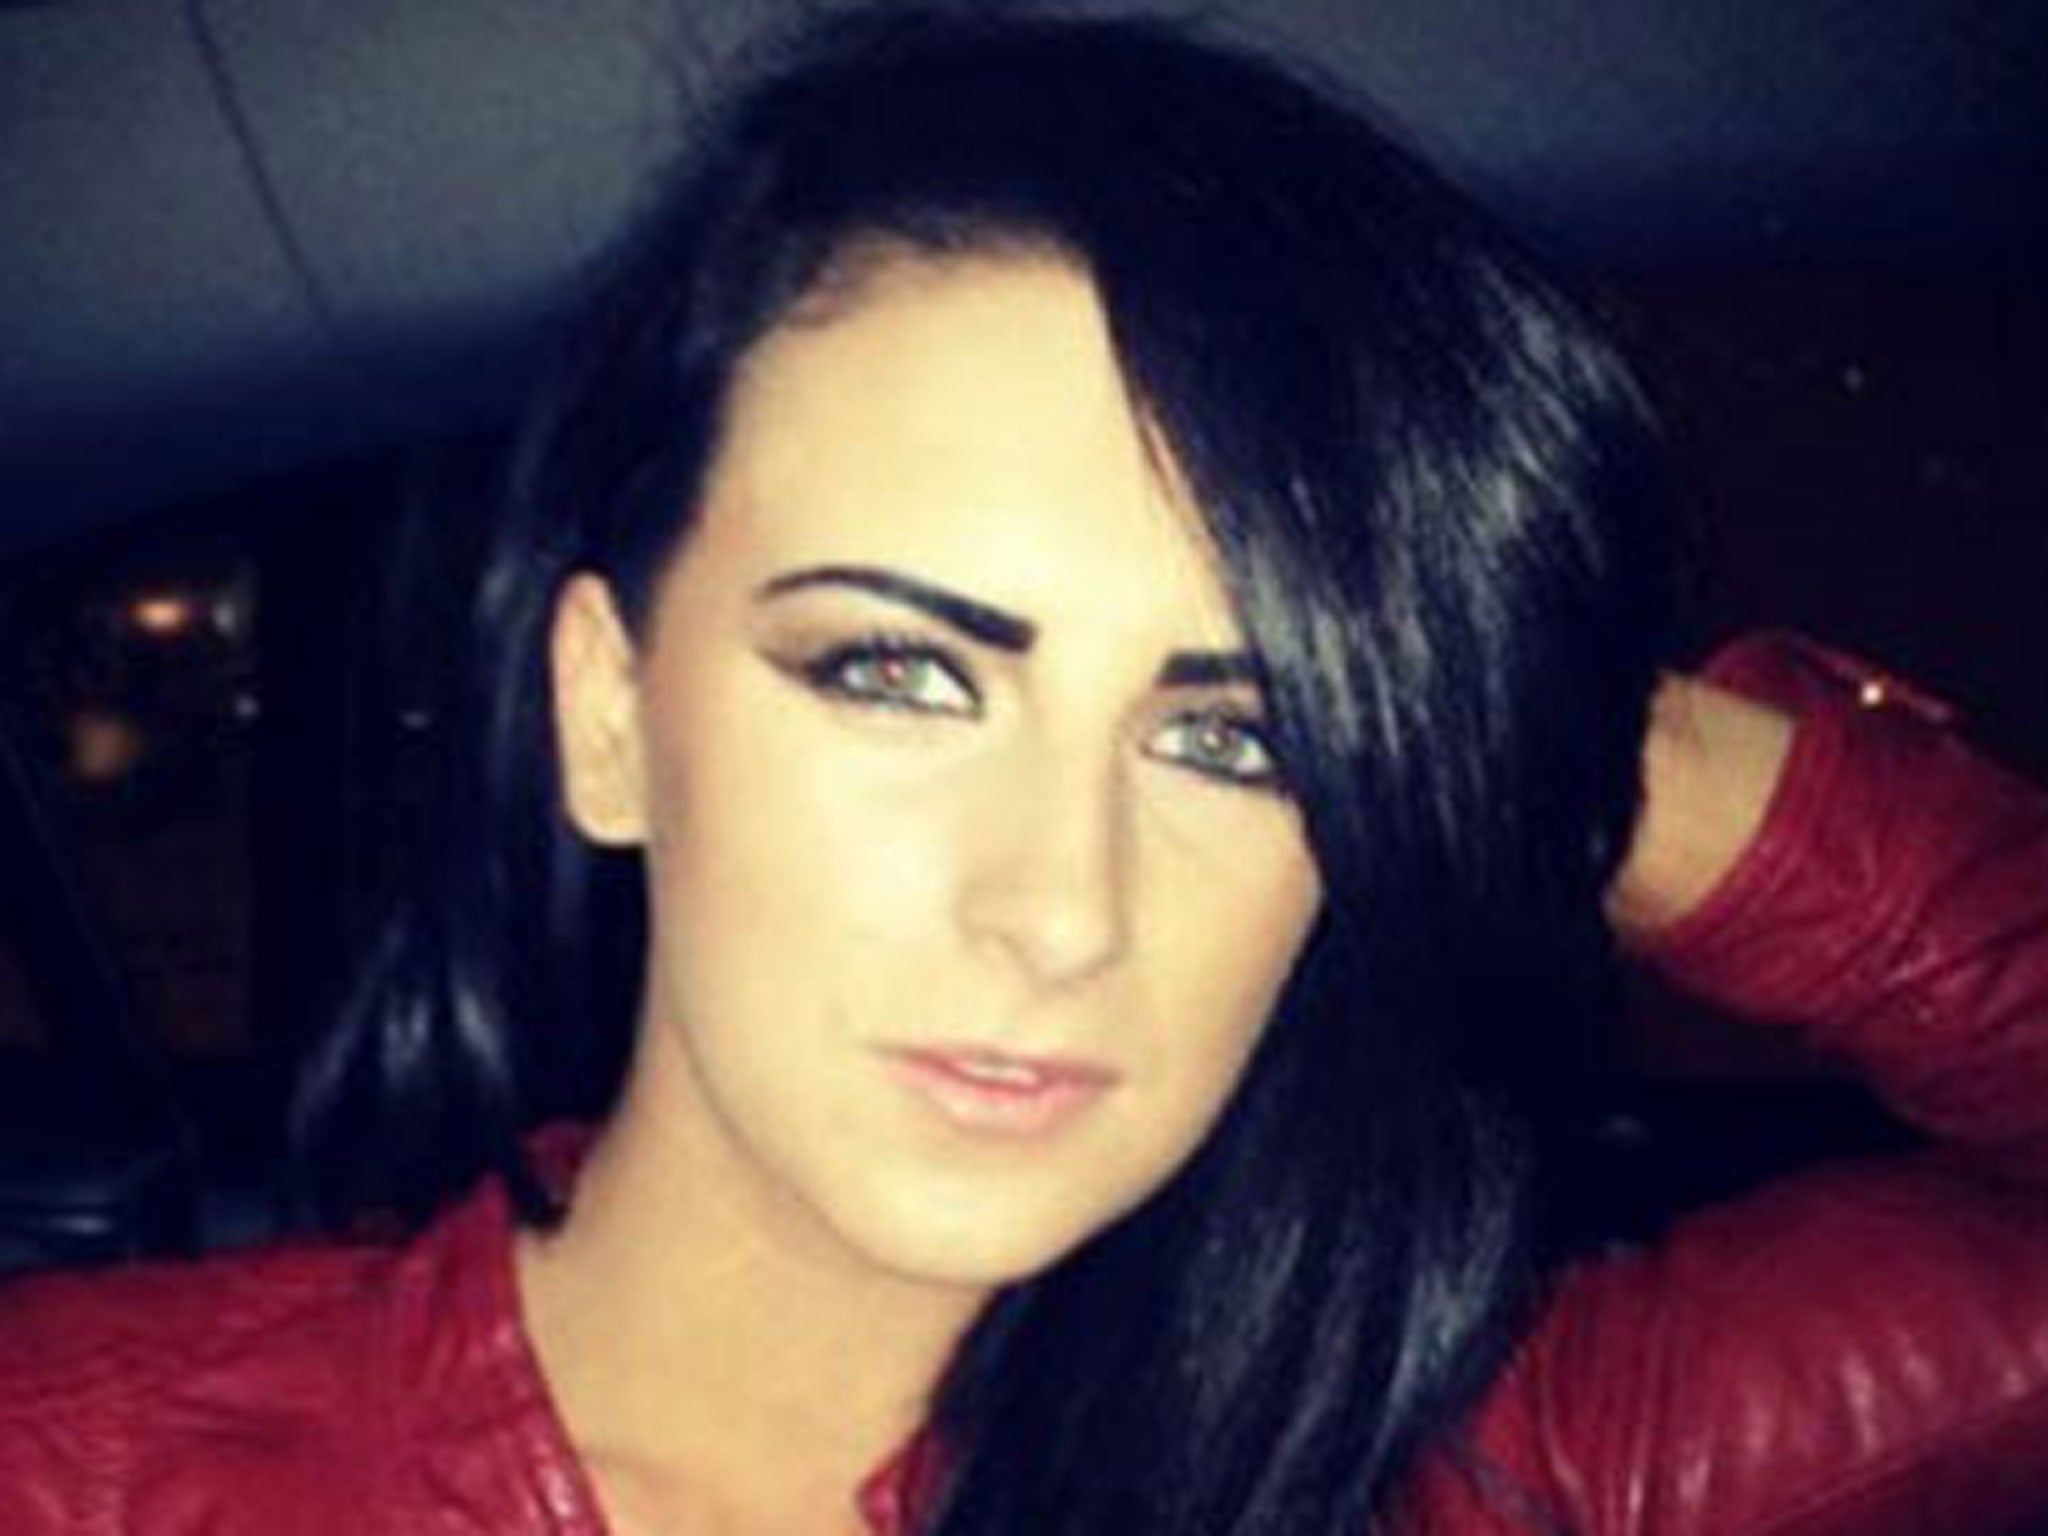 Michaella McCollum (pictured) and Melissa Reid have been arrested in Peru